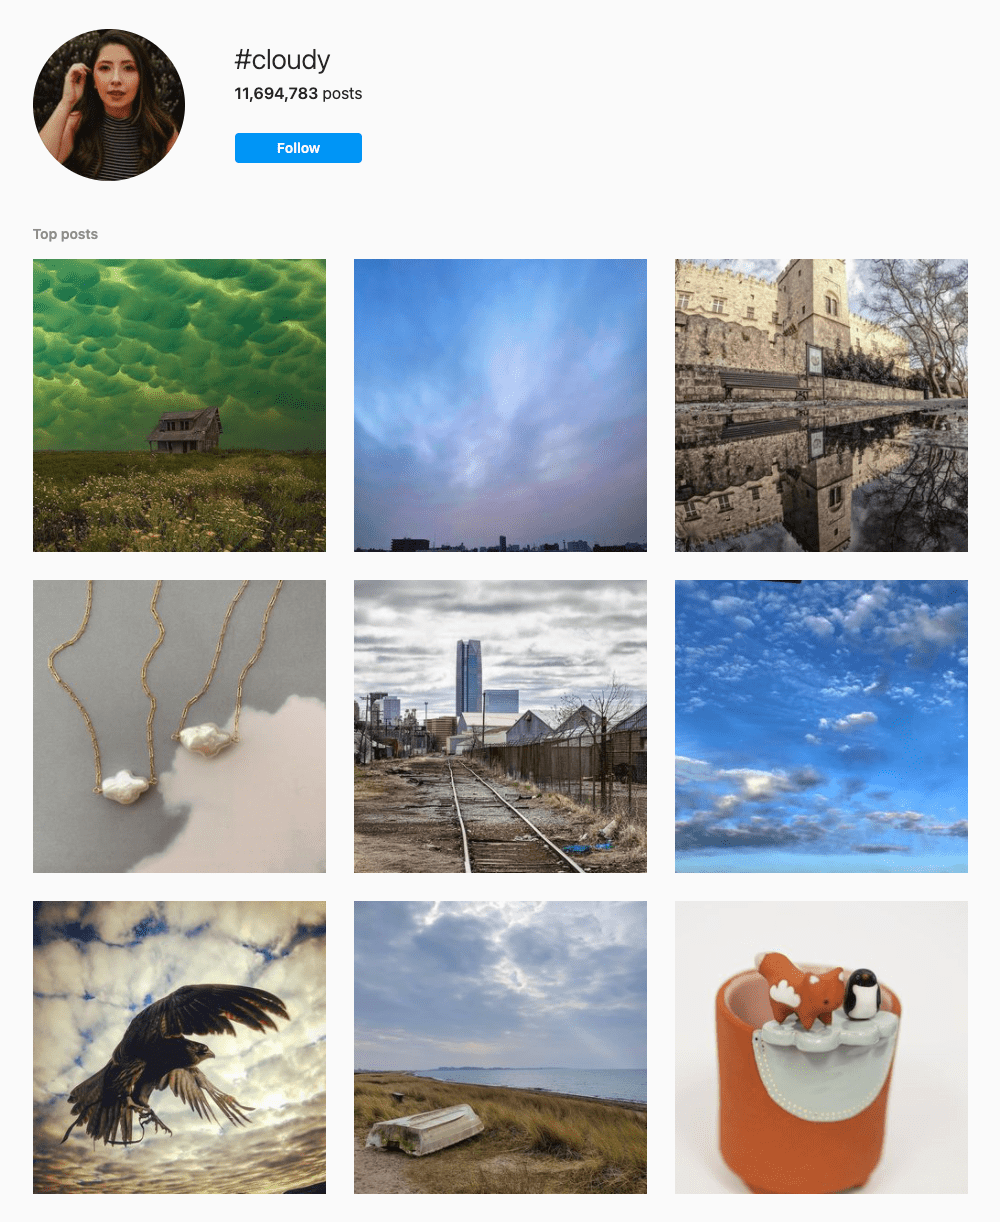 #cloudy Hashtags for Instagram